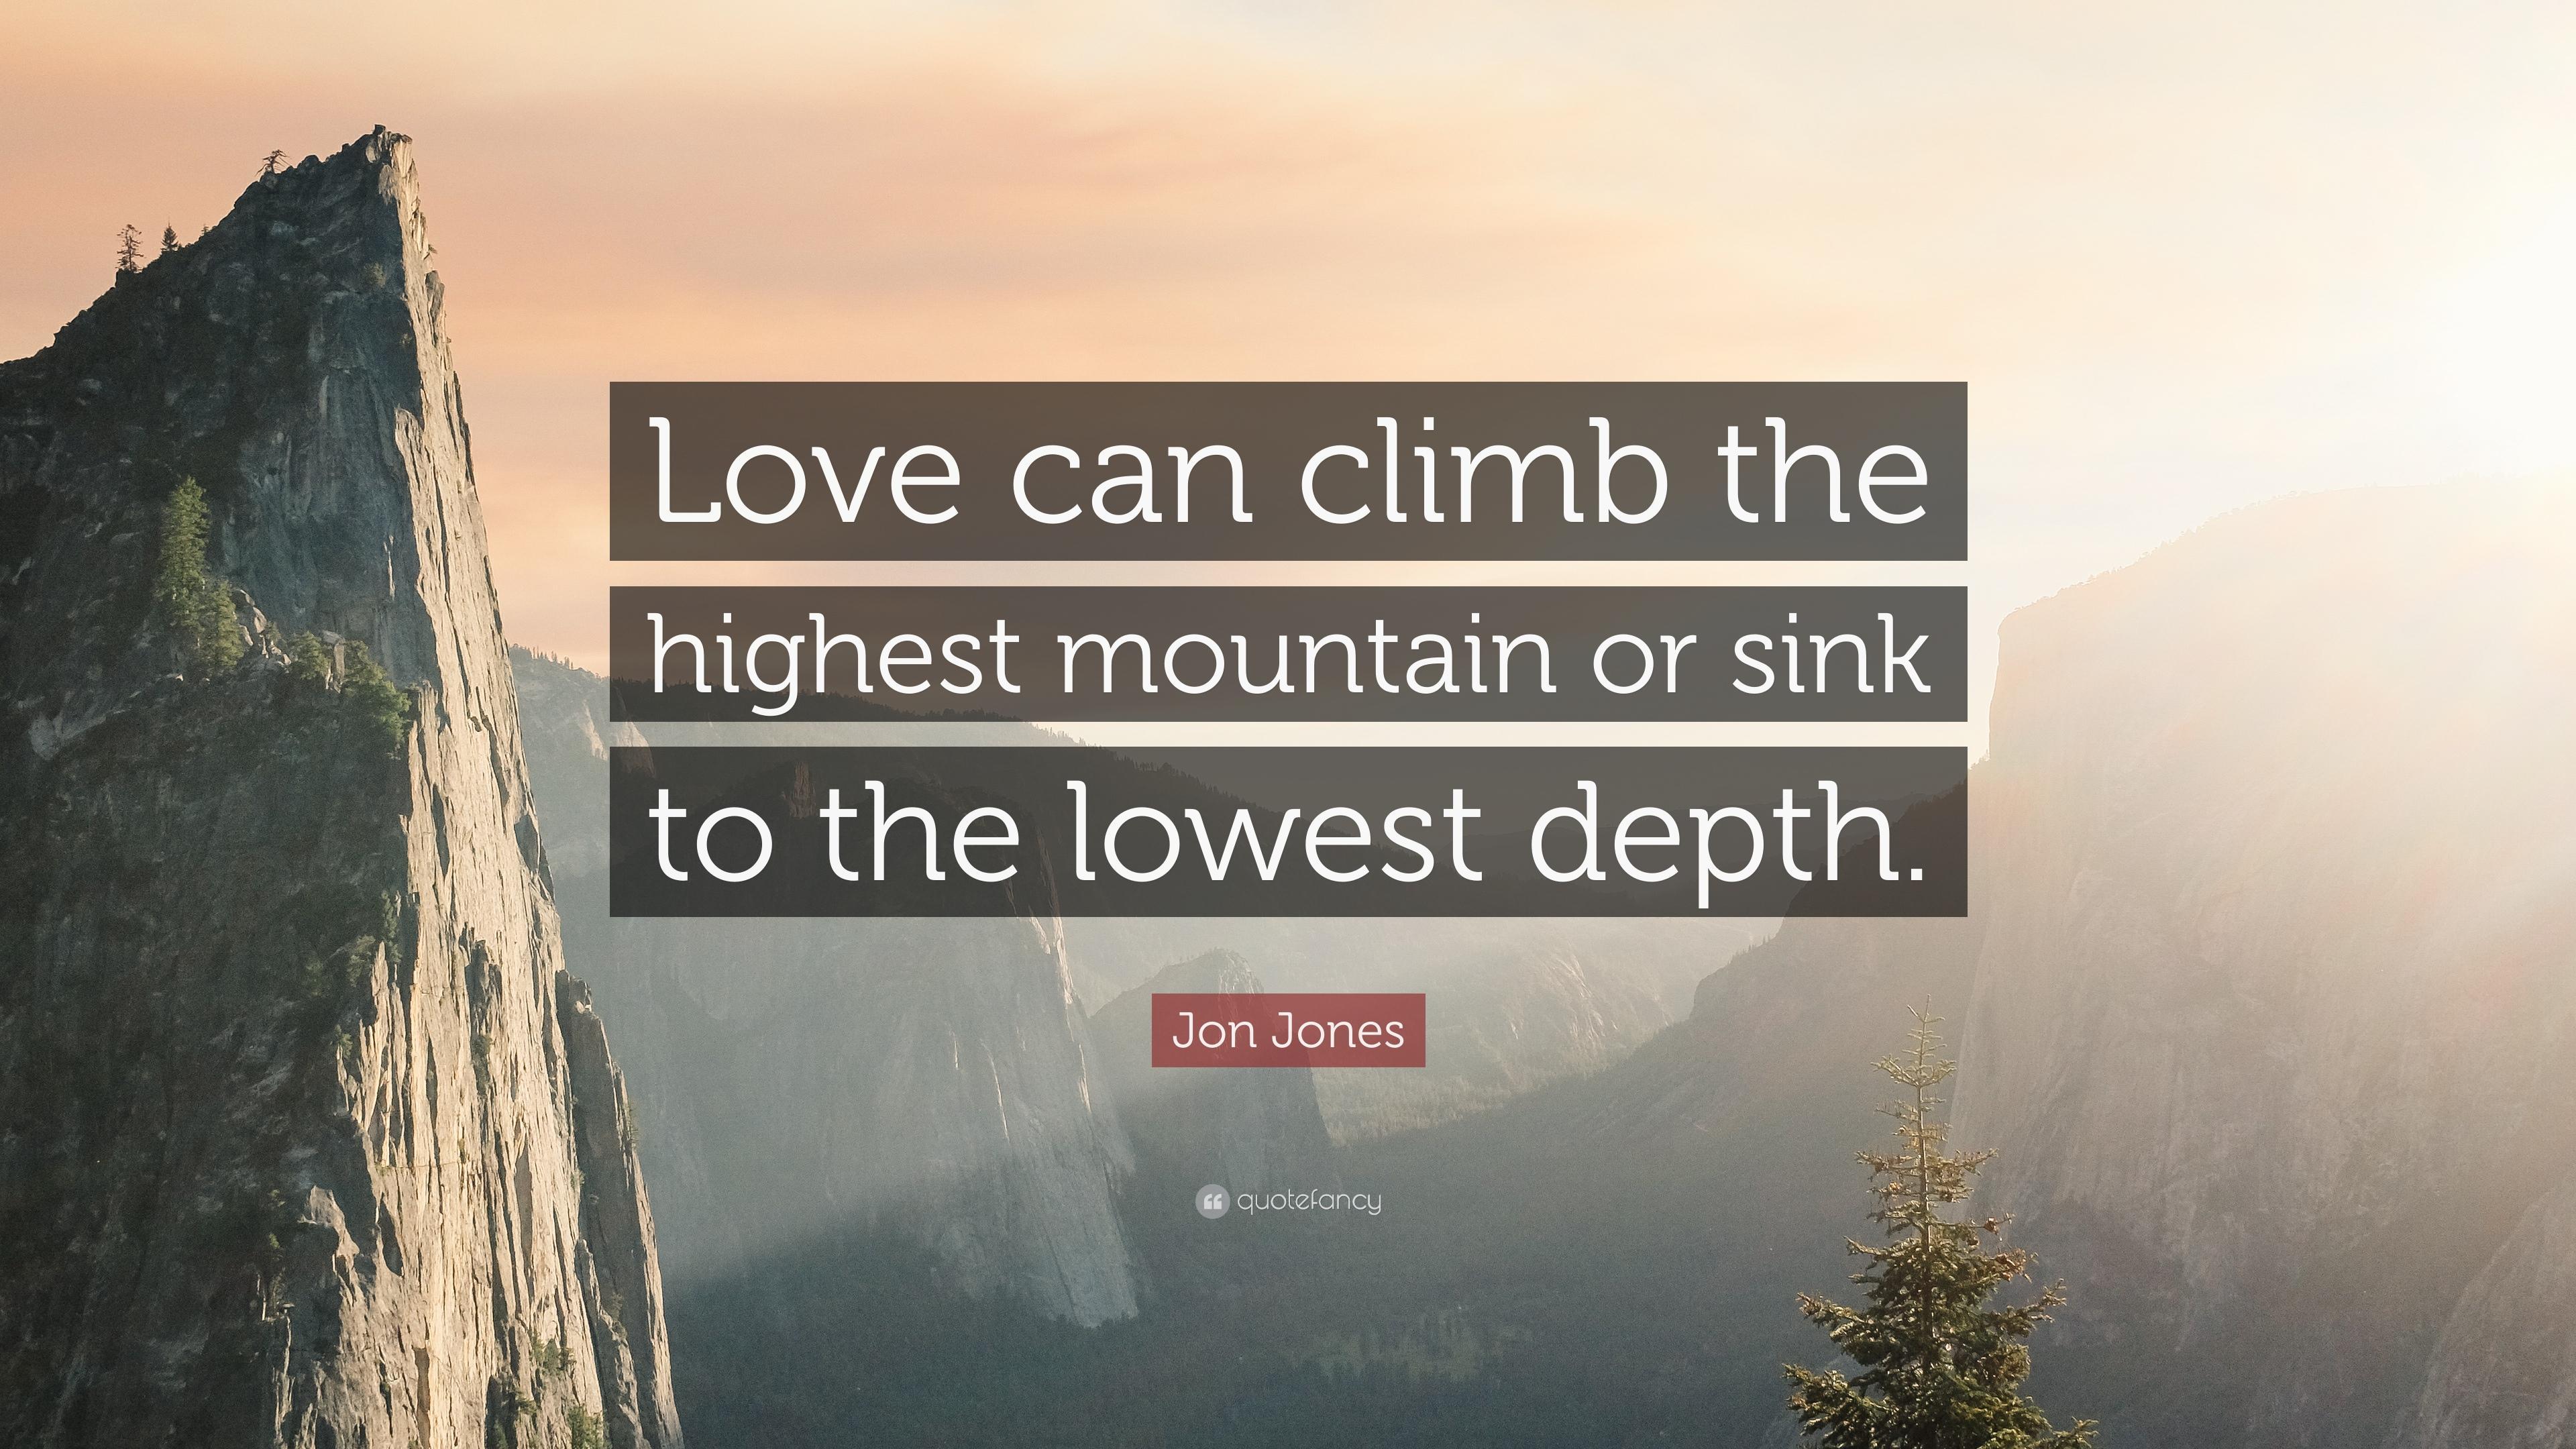 Jon Jones Quote: “Love can climb the highest mountain or